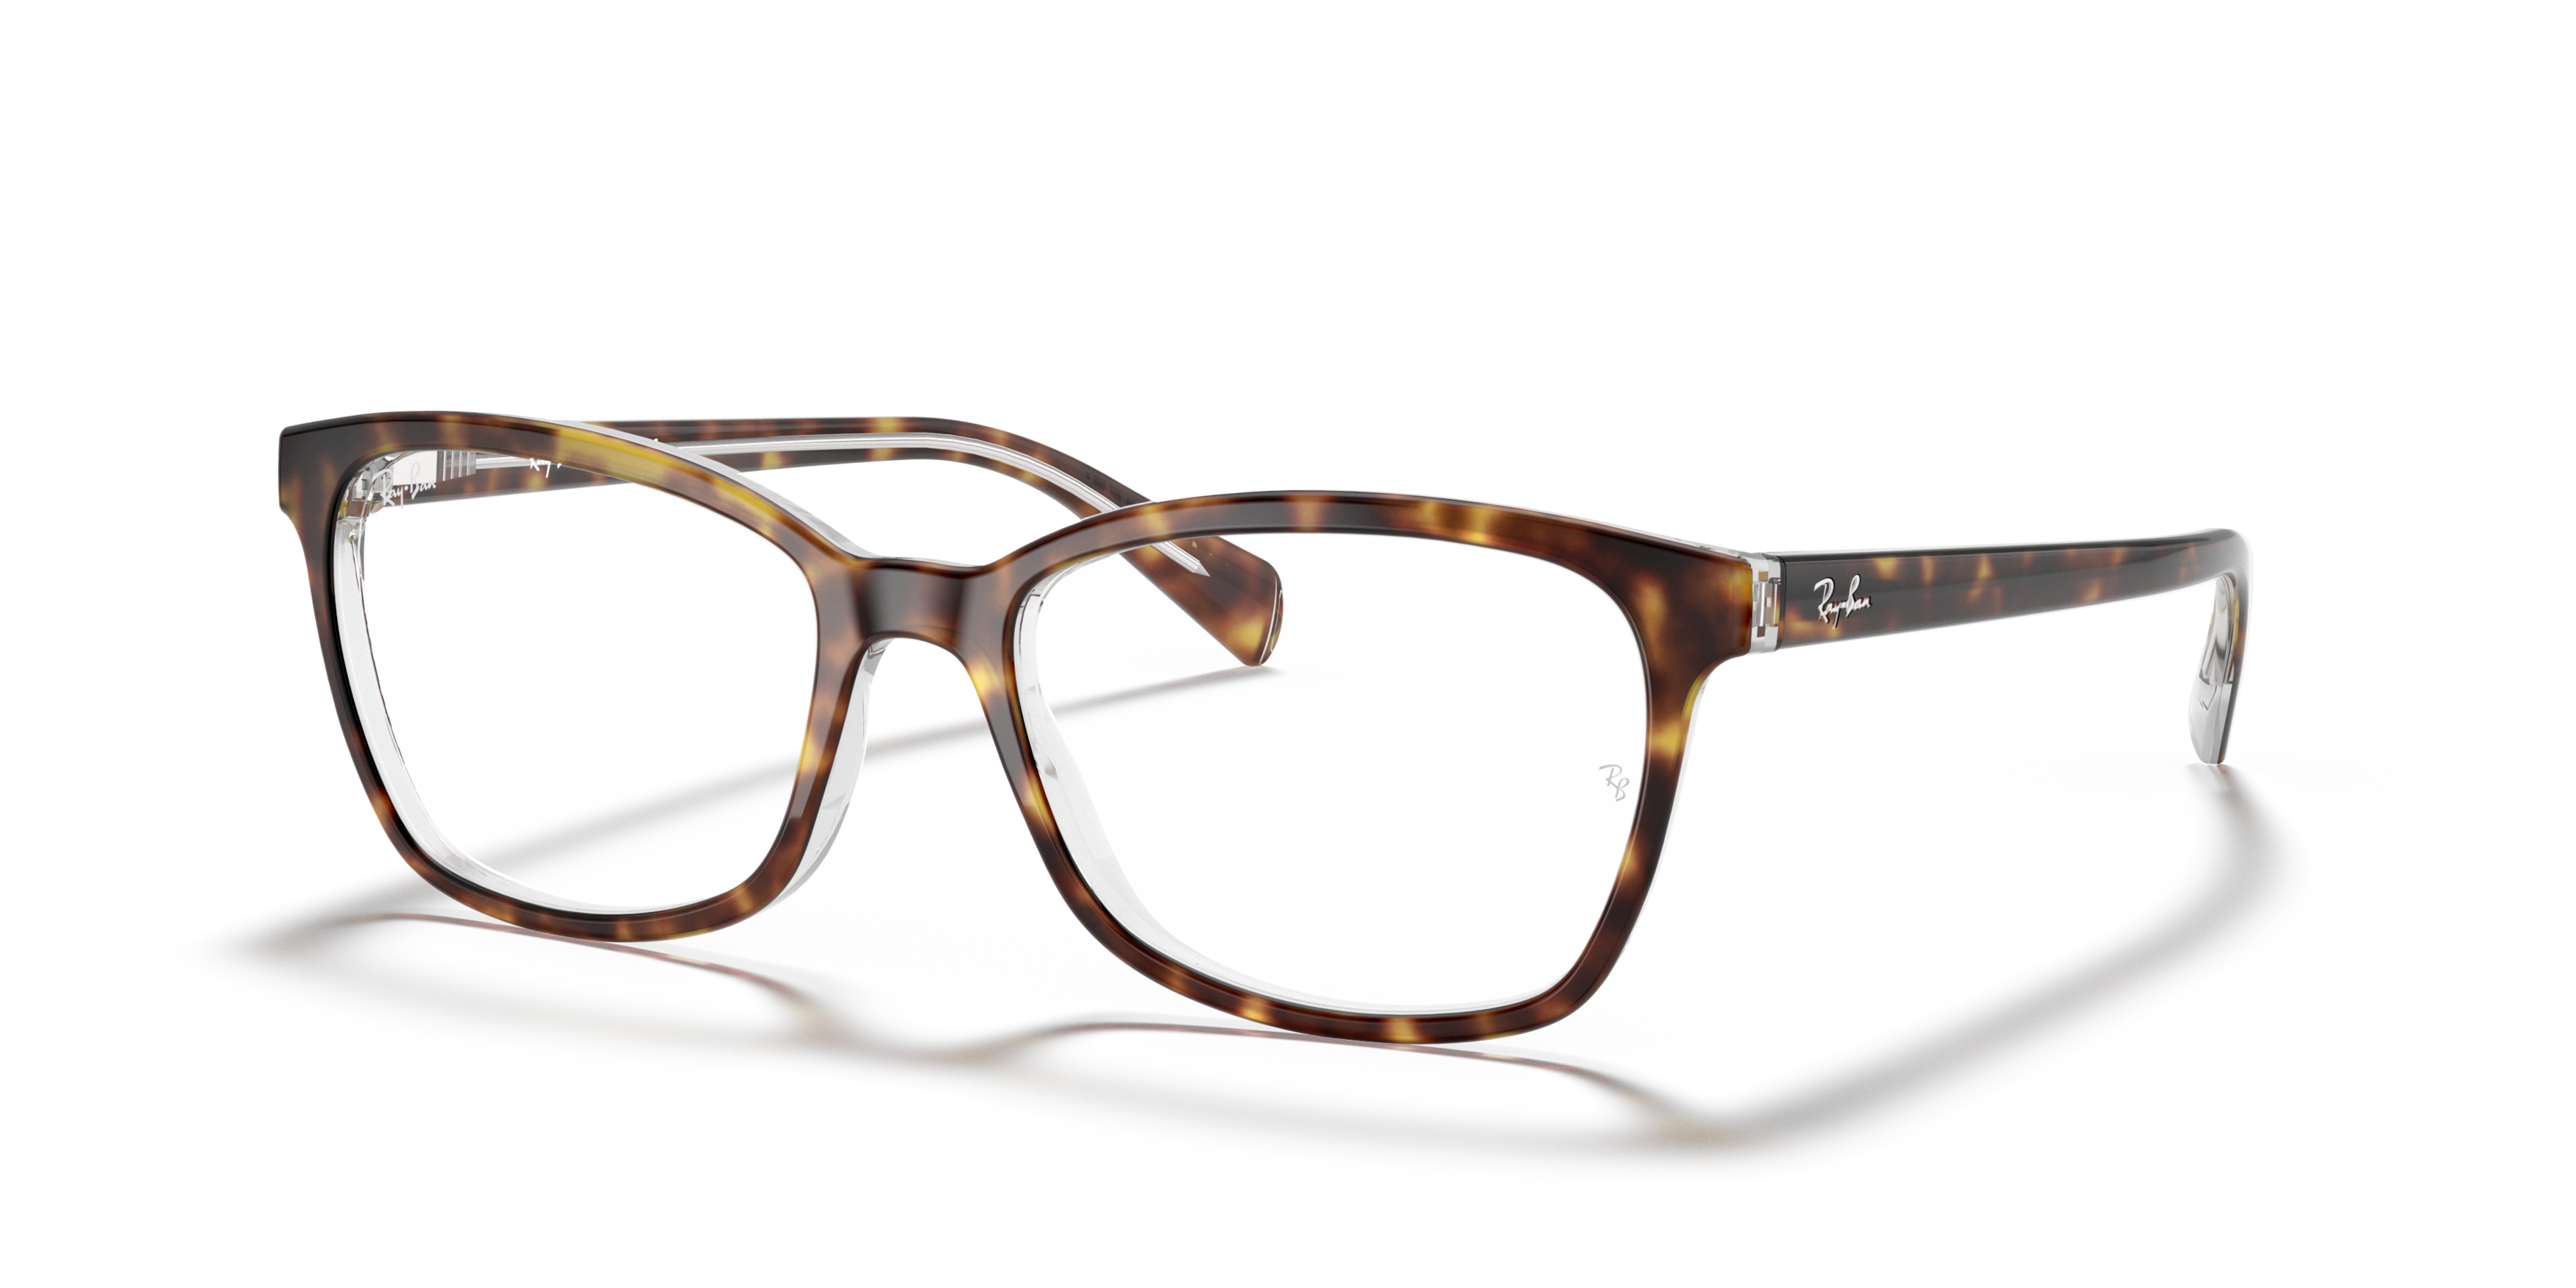 Angle_Left01 Ray-Ban RX 5362 (5082) Glasses Transparent / Tortoise Shell